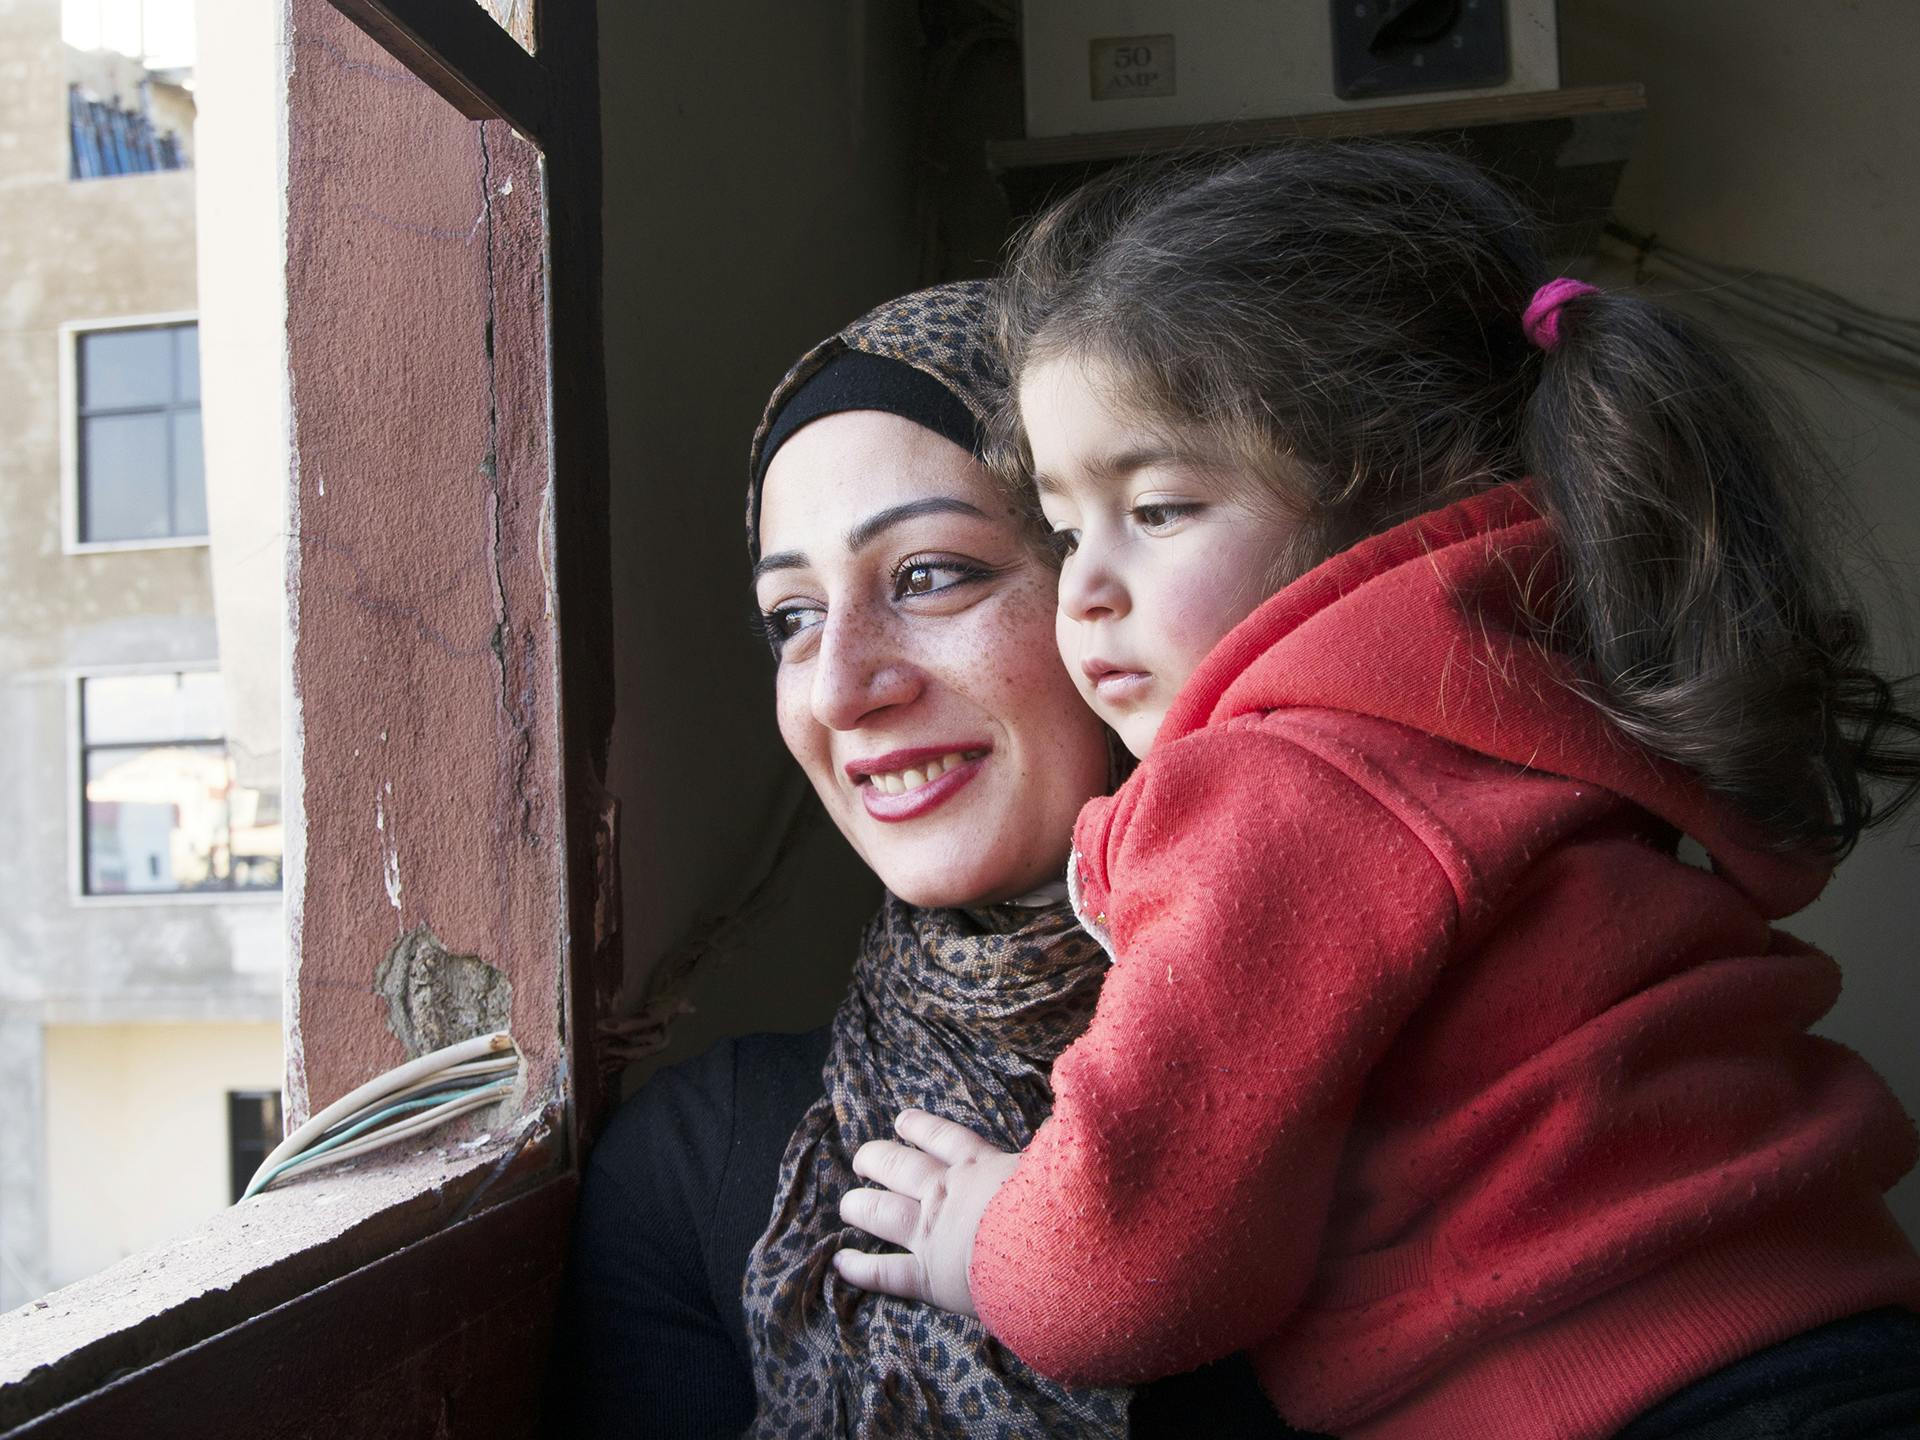 A Palestine woman and her child looking out through a window